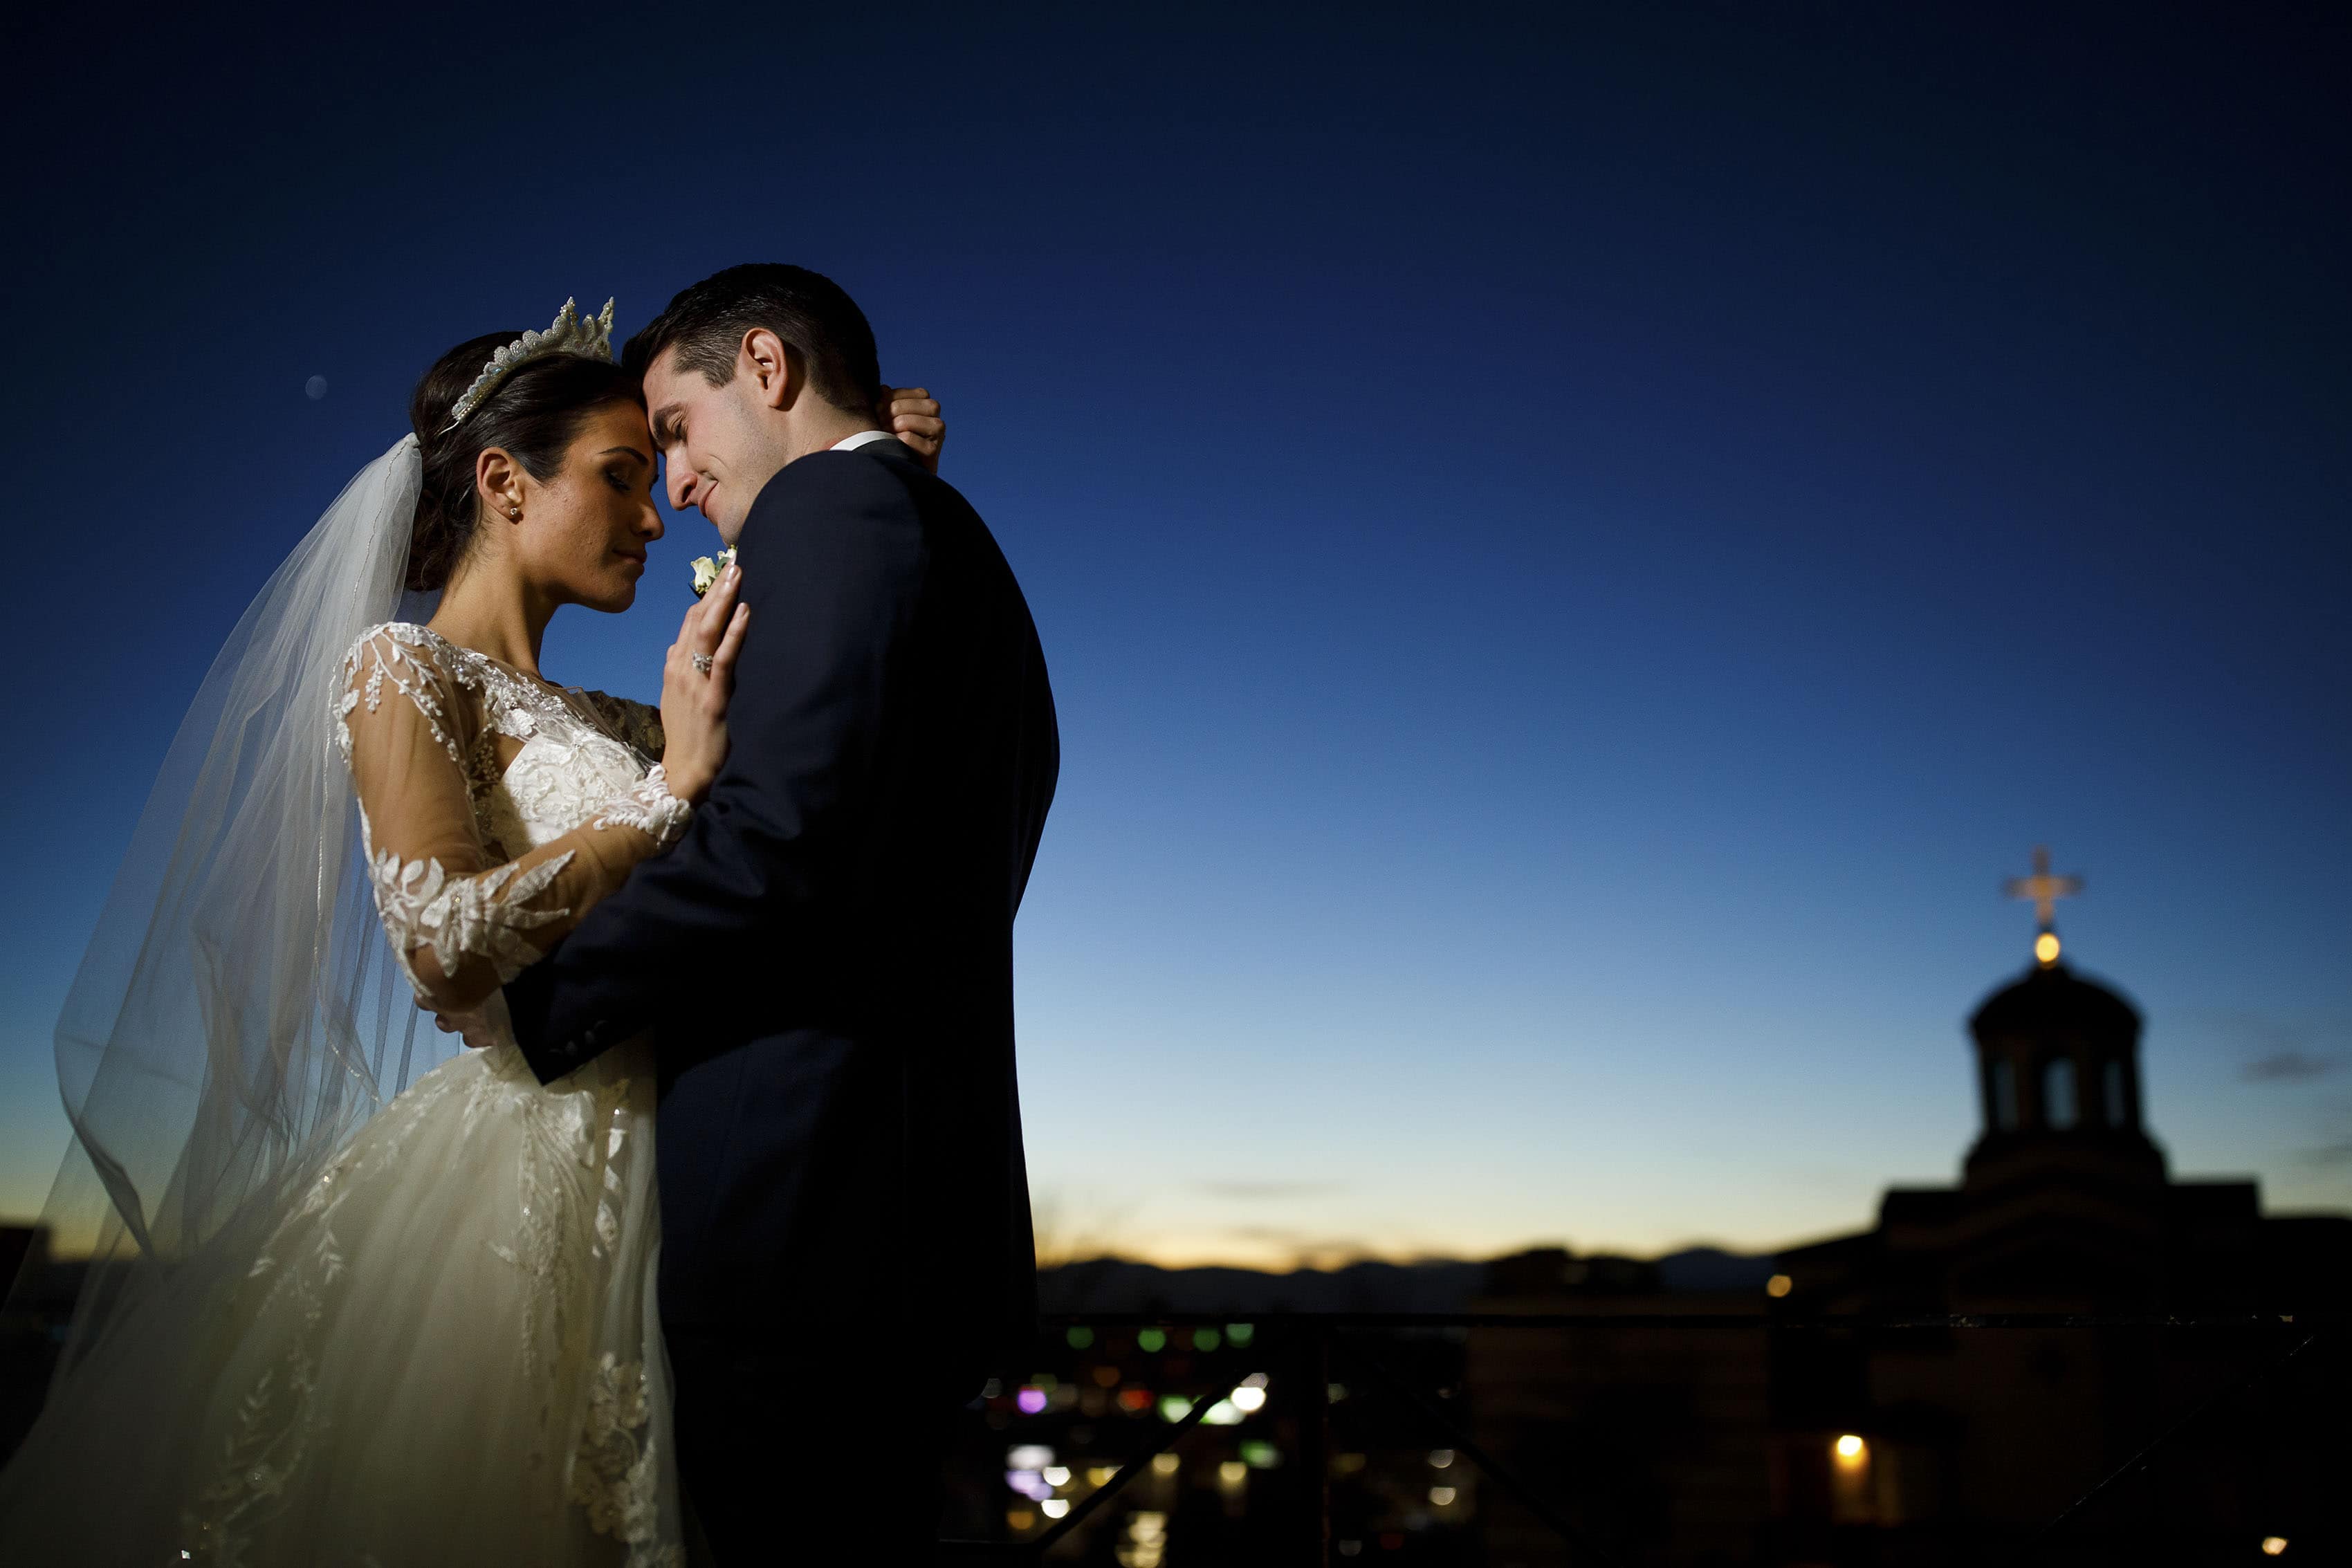 Newlyweds Alex and Ioanna share a moment outside the Assumption of the Theotokos Greek Orthodox Cathedral at twilight